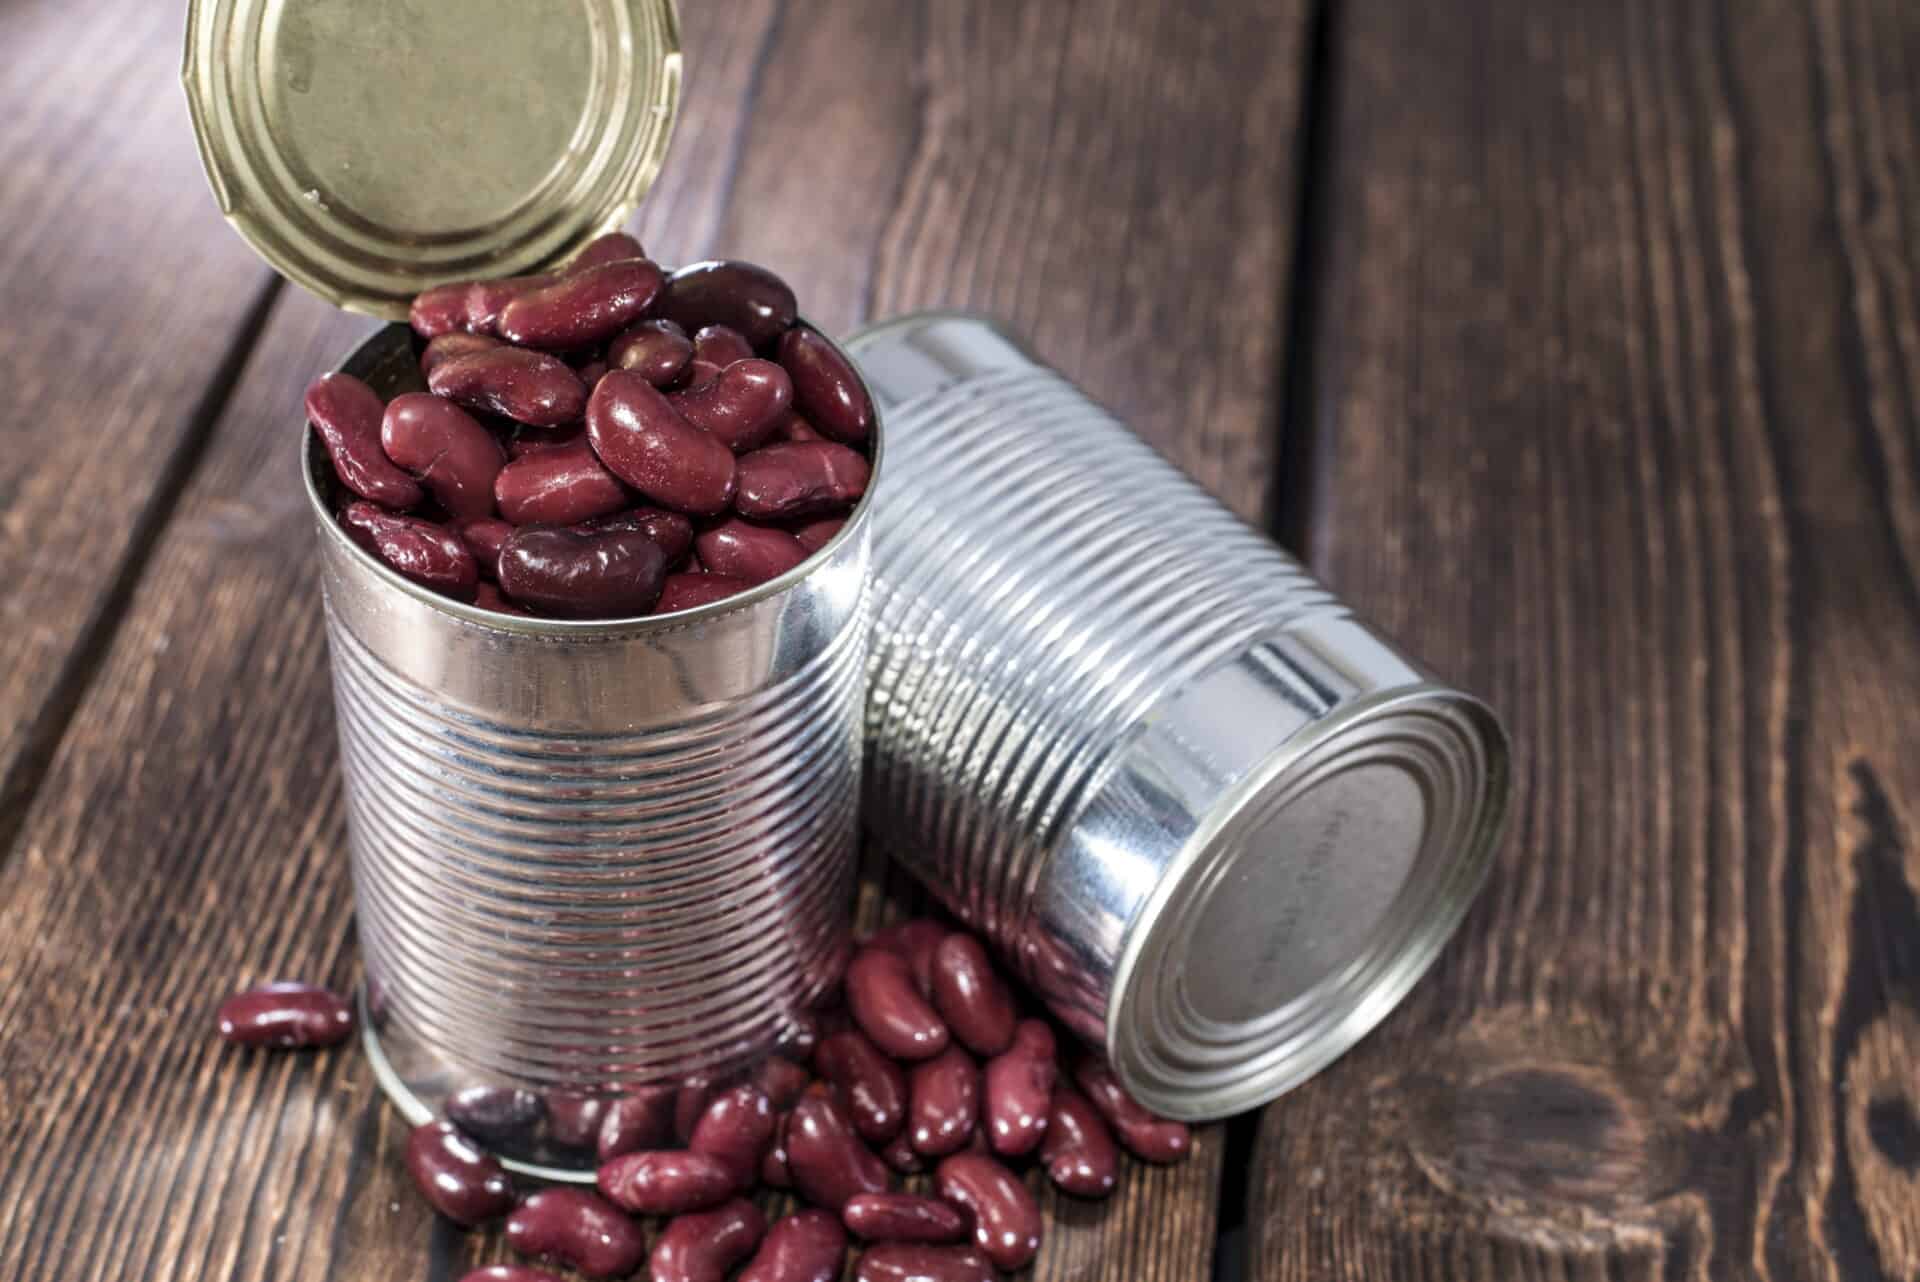 Best Canned Refried Beans Brands 2020